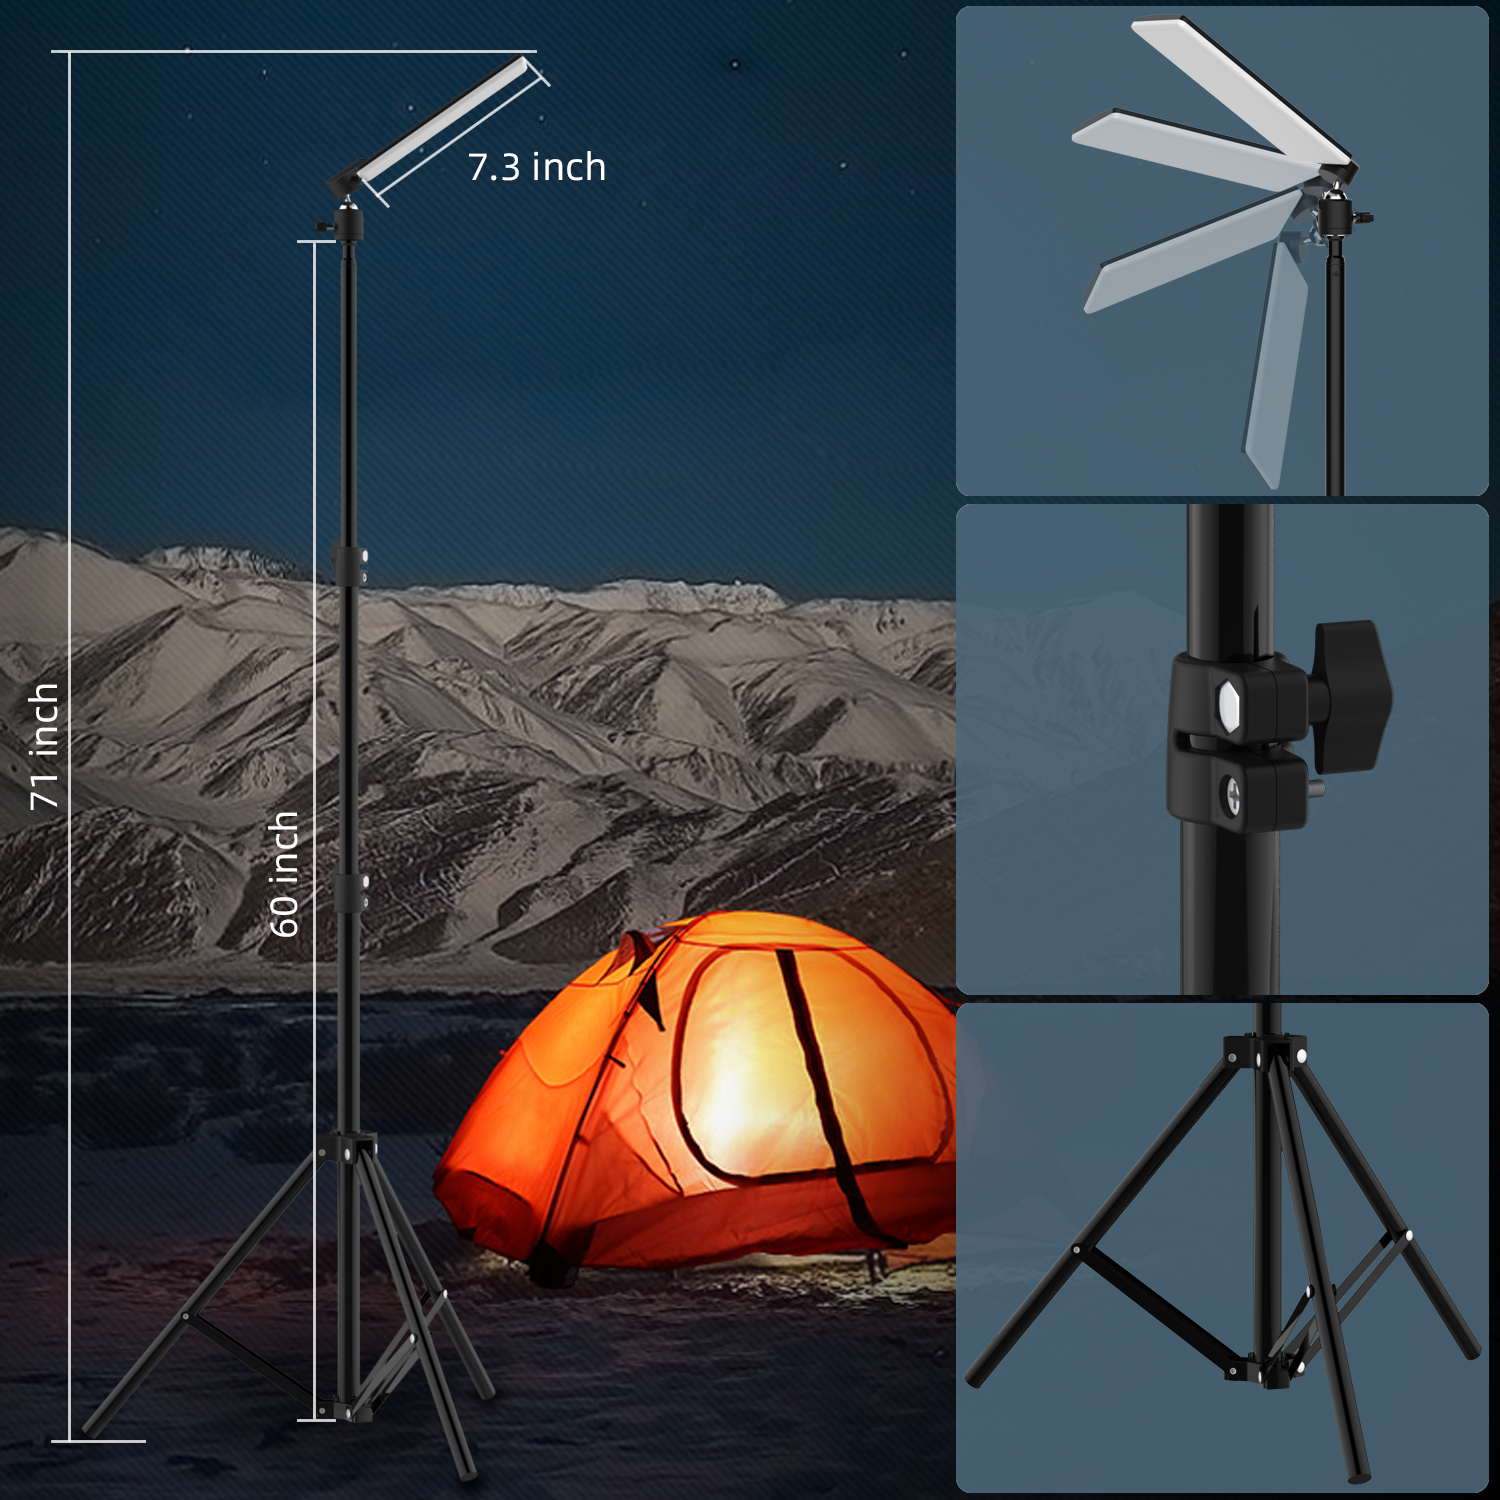 Upgraded-Head-CL03-84LEDs-Retractable--Foldable-18m-Tripod-Stand-Light-6500-7000K-Brightness-Height--1948283-11